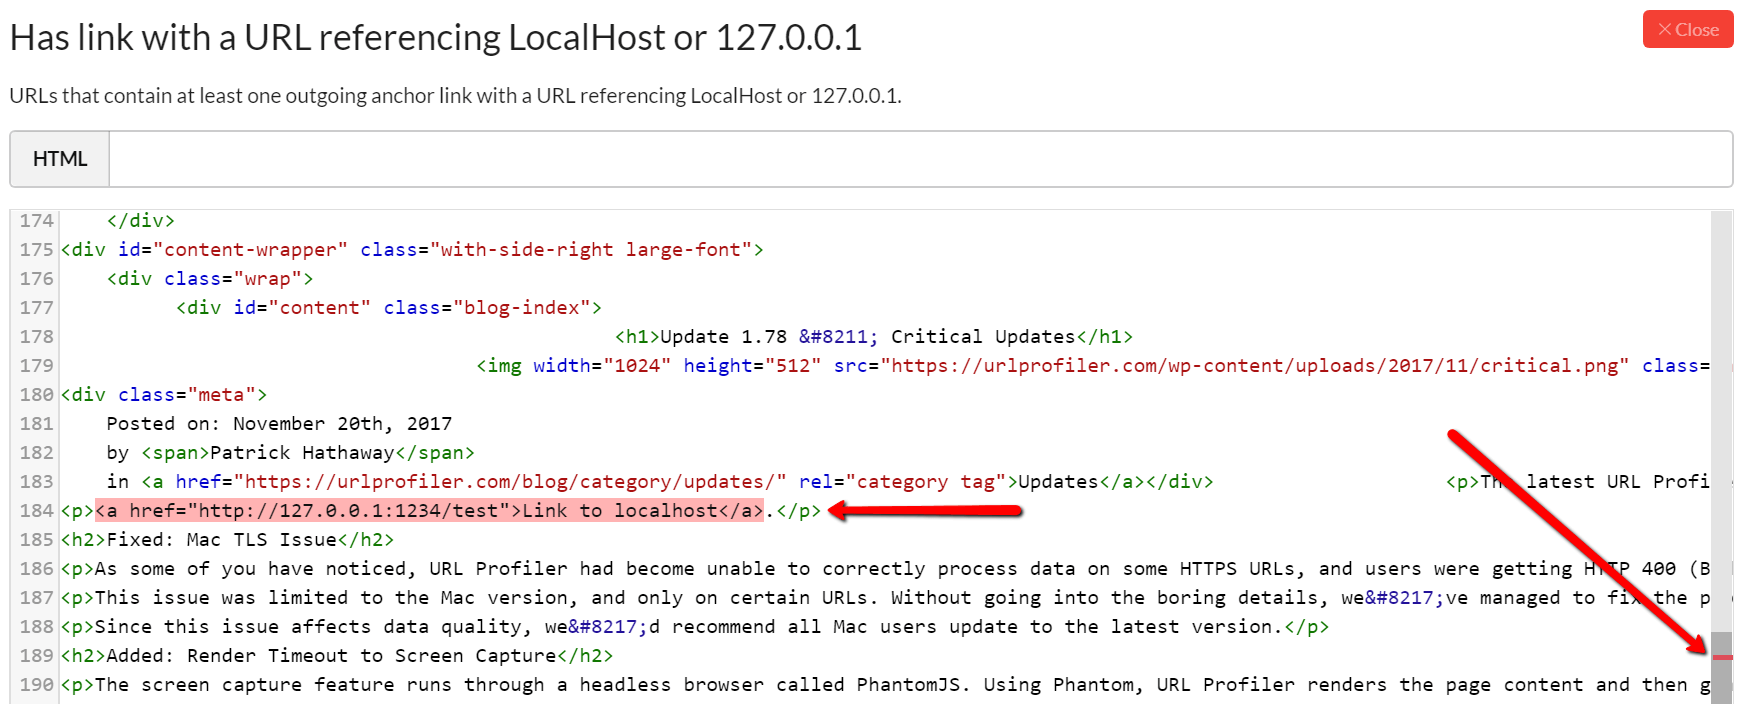 Hint details link references localhost